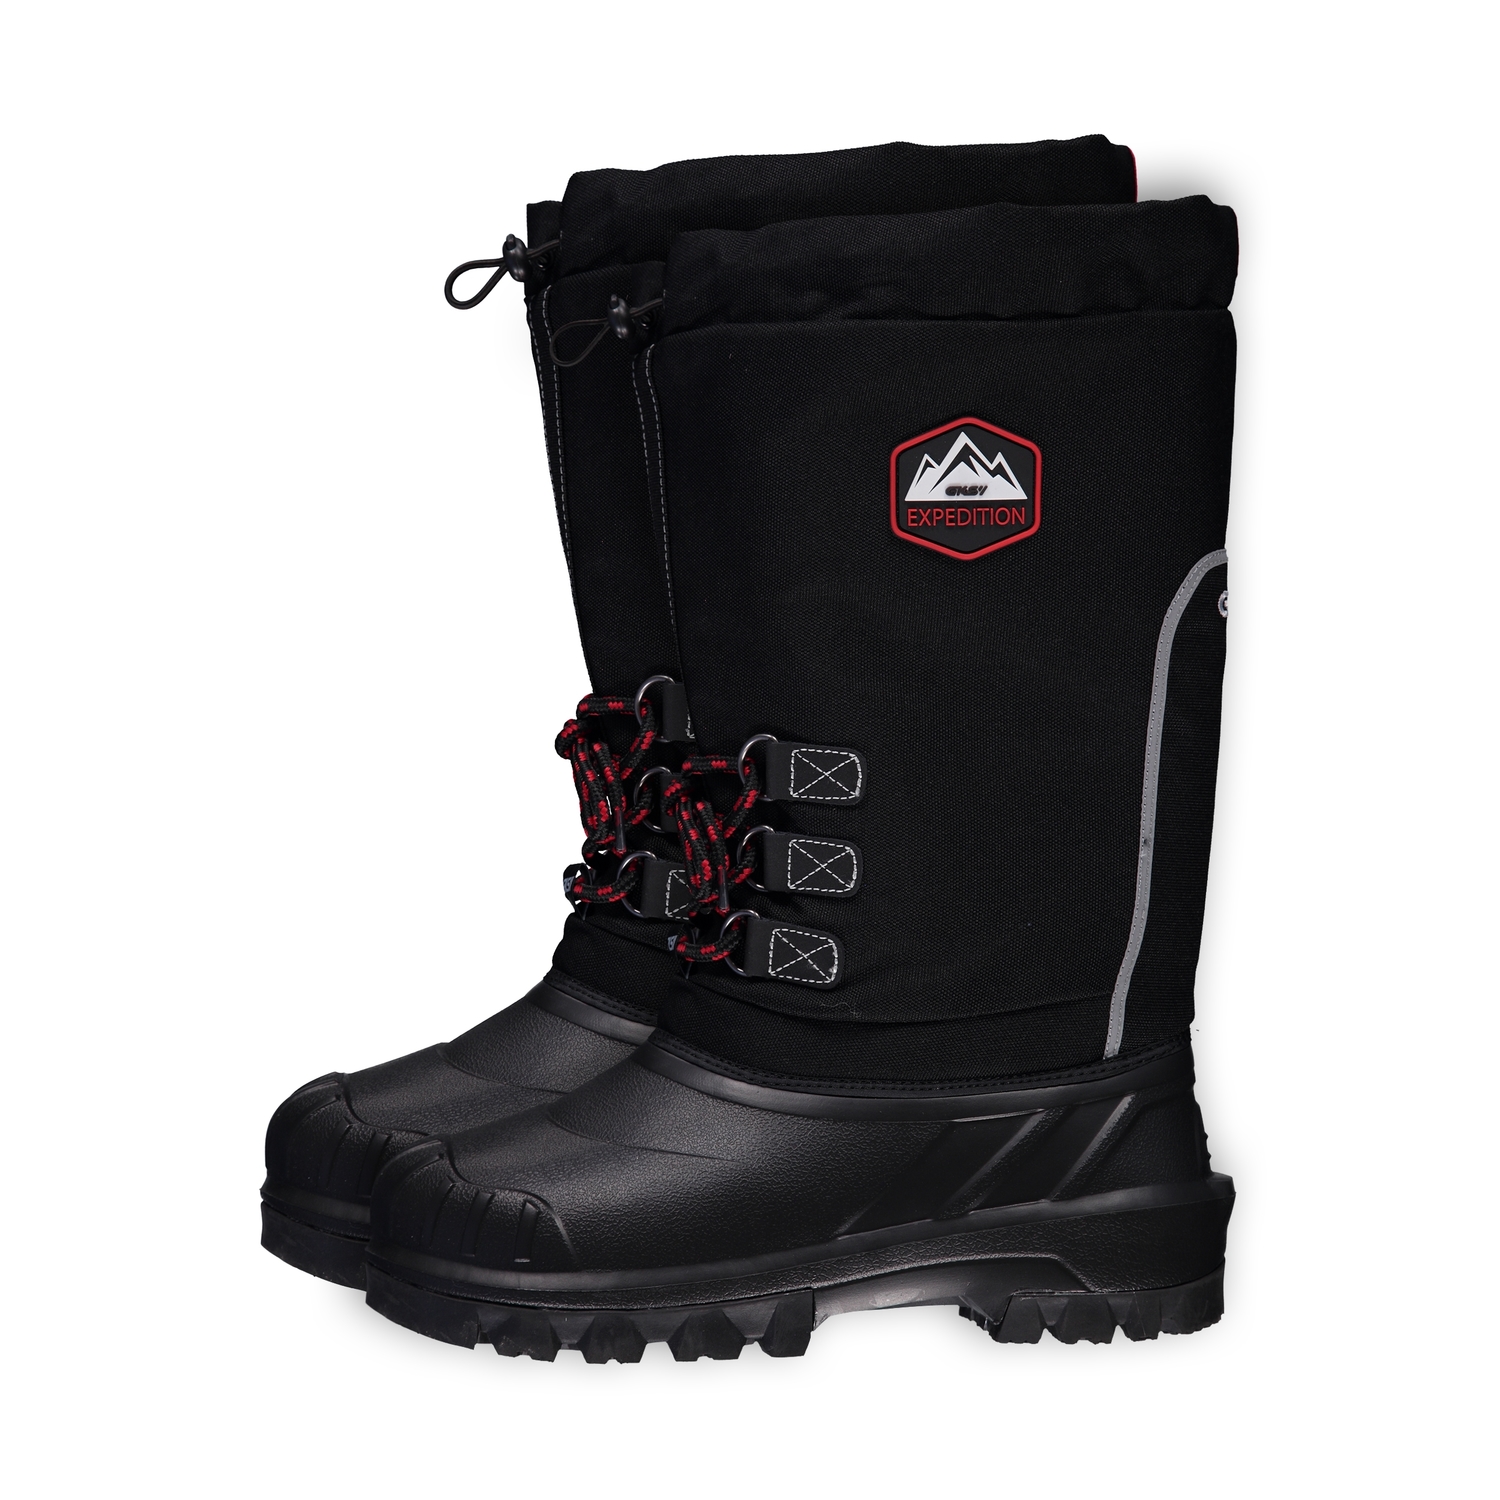 Bottes GKS Expedition - 